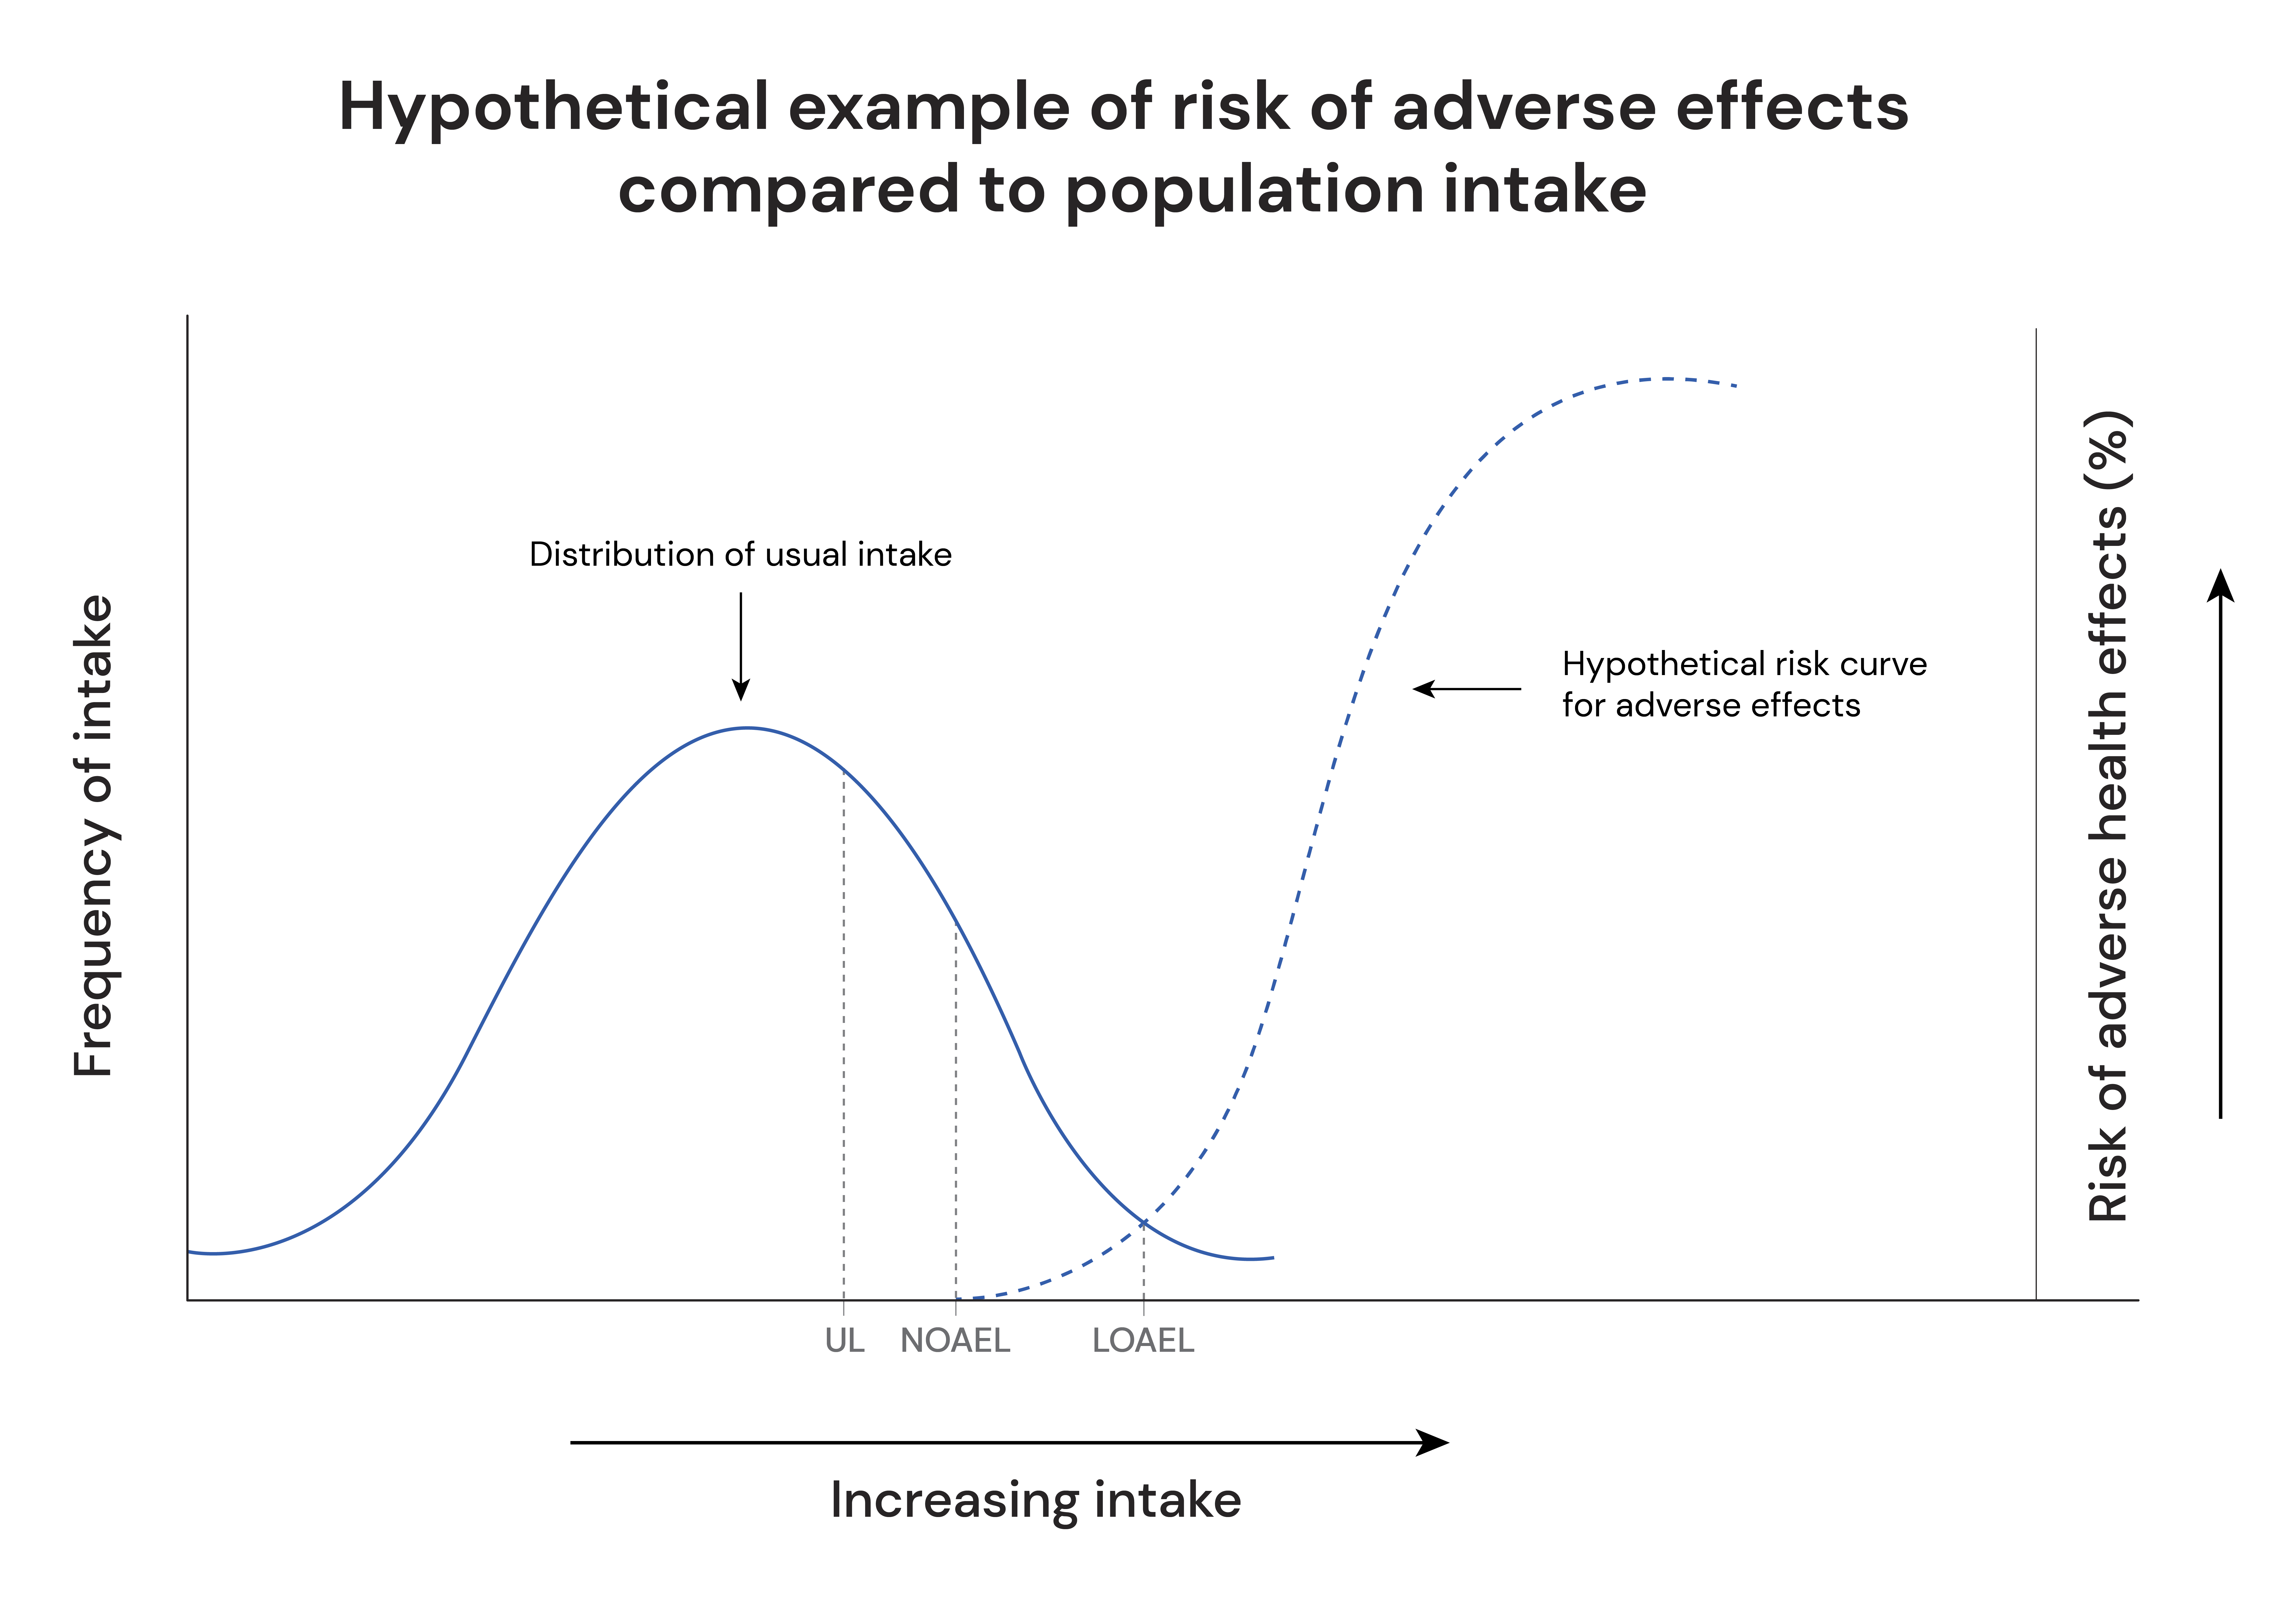 hypothetical example of risk of adverse effects compared to population intake